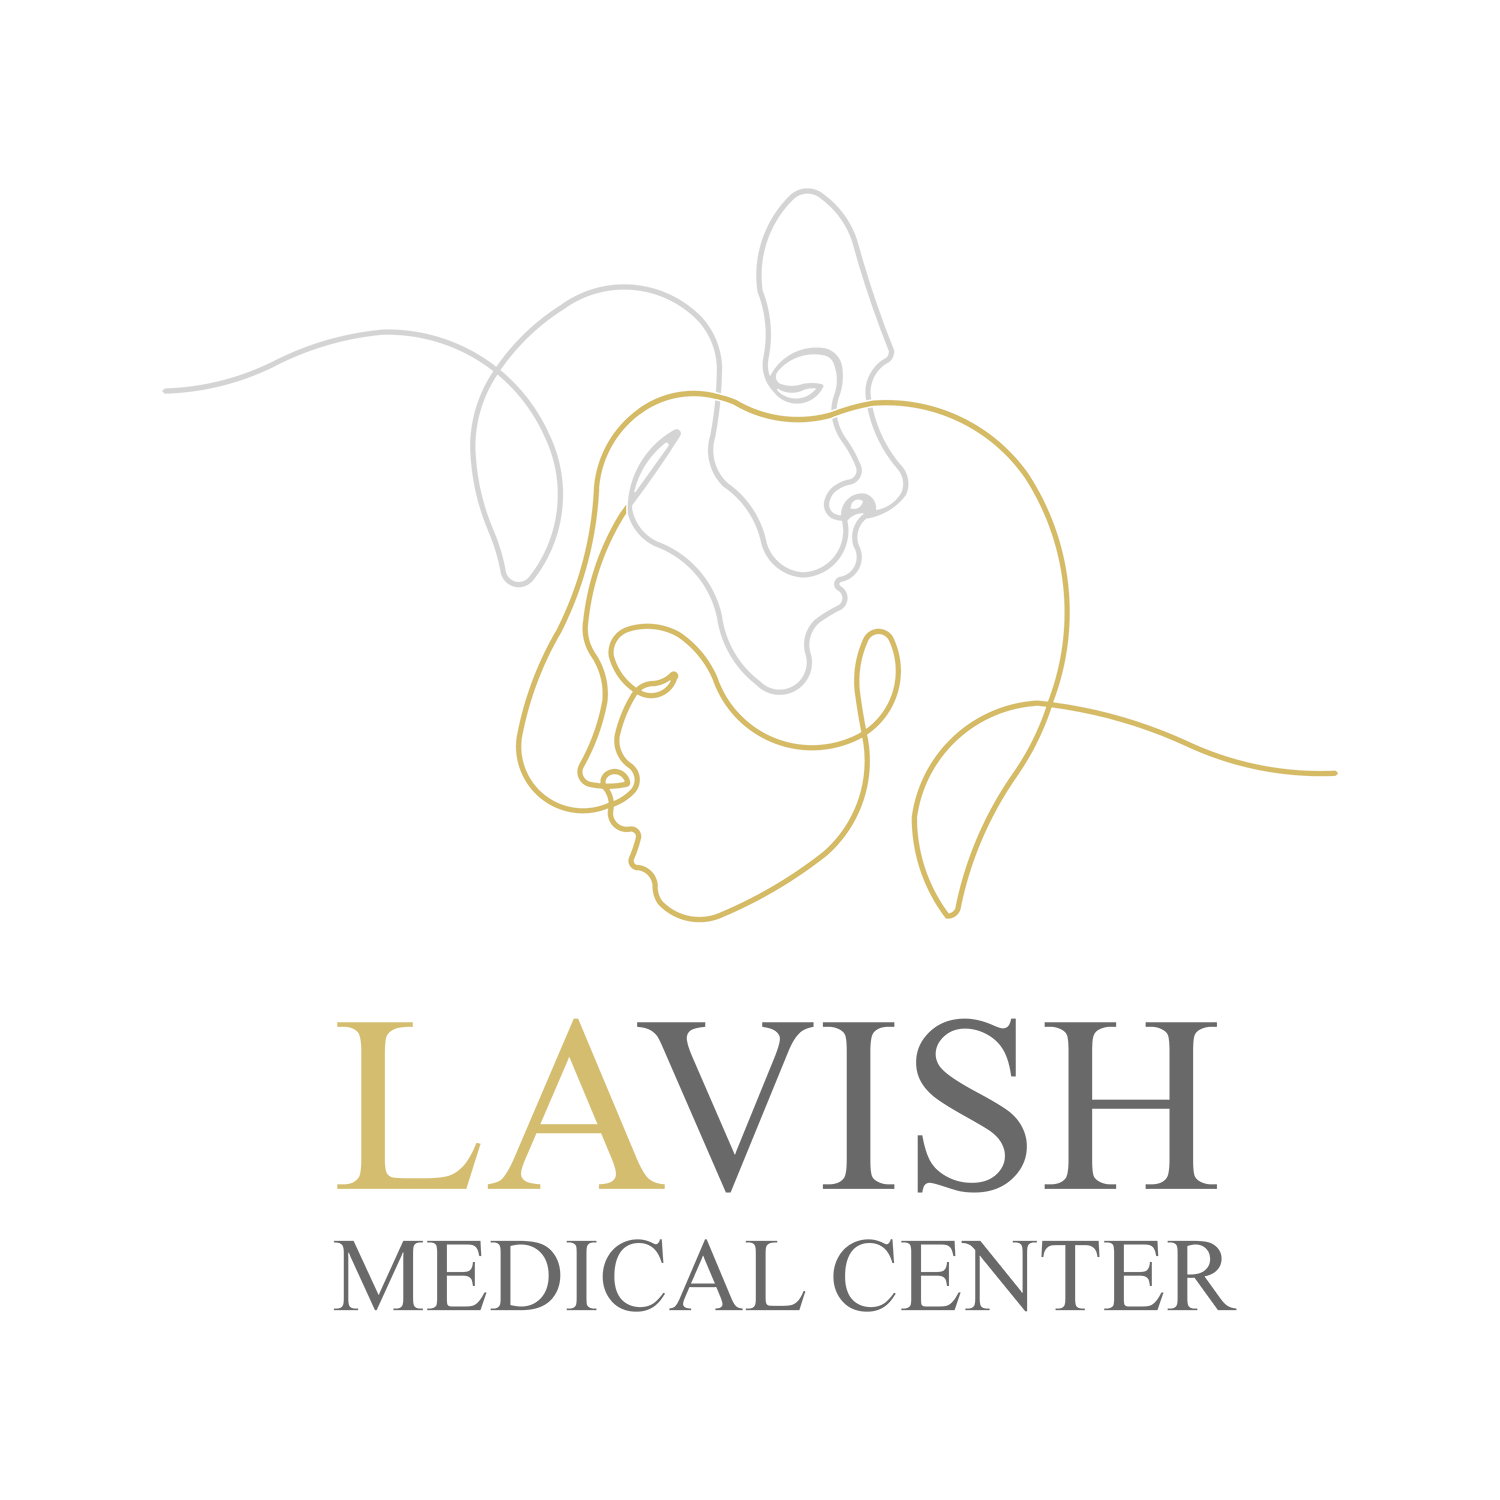 Lavish Medical Center - "Beyond cure and beauty"